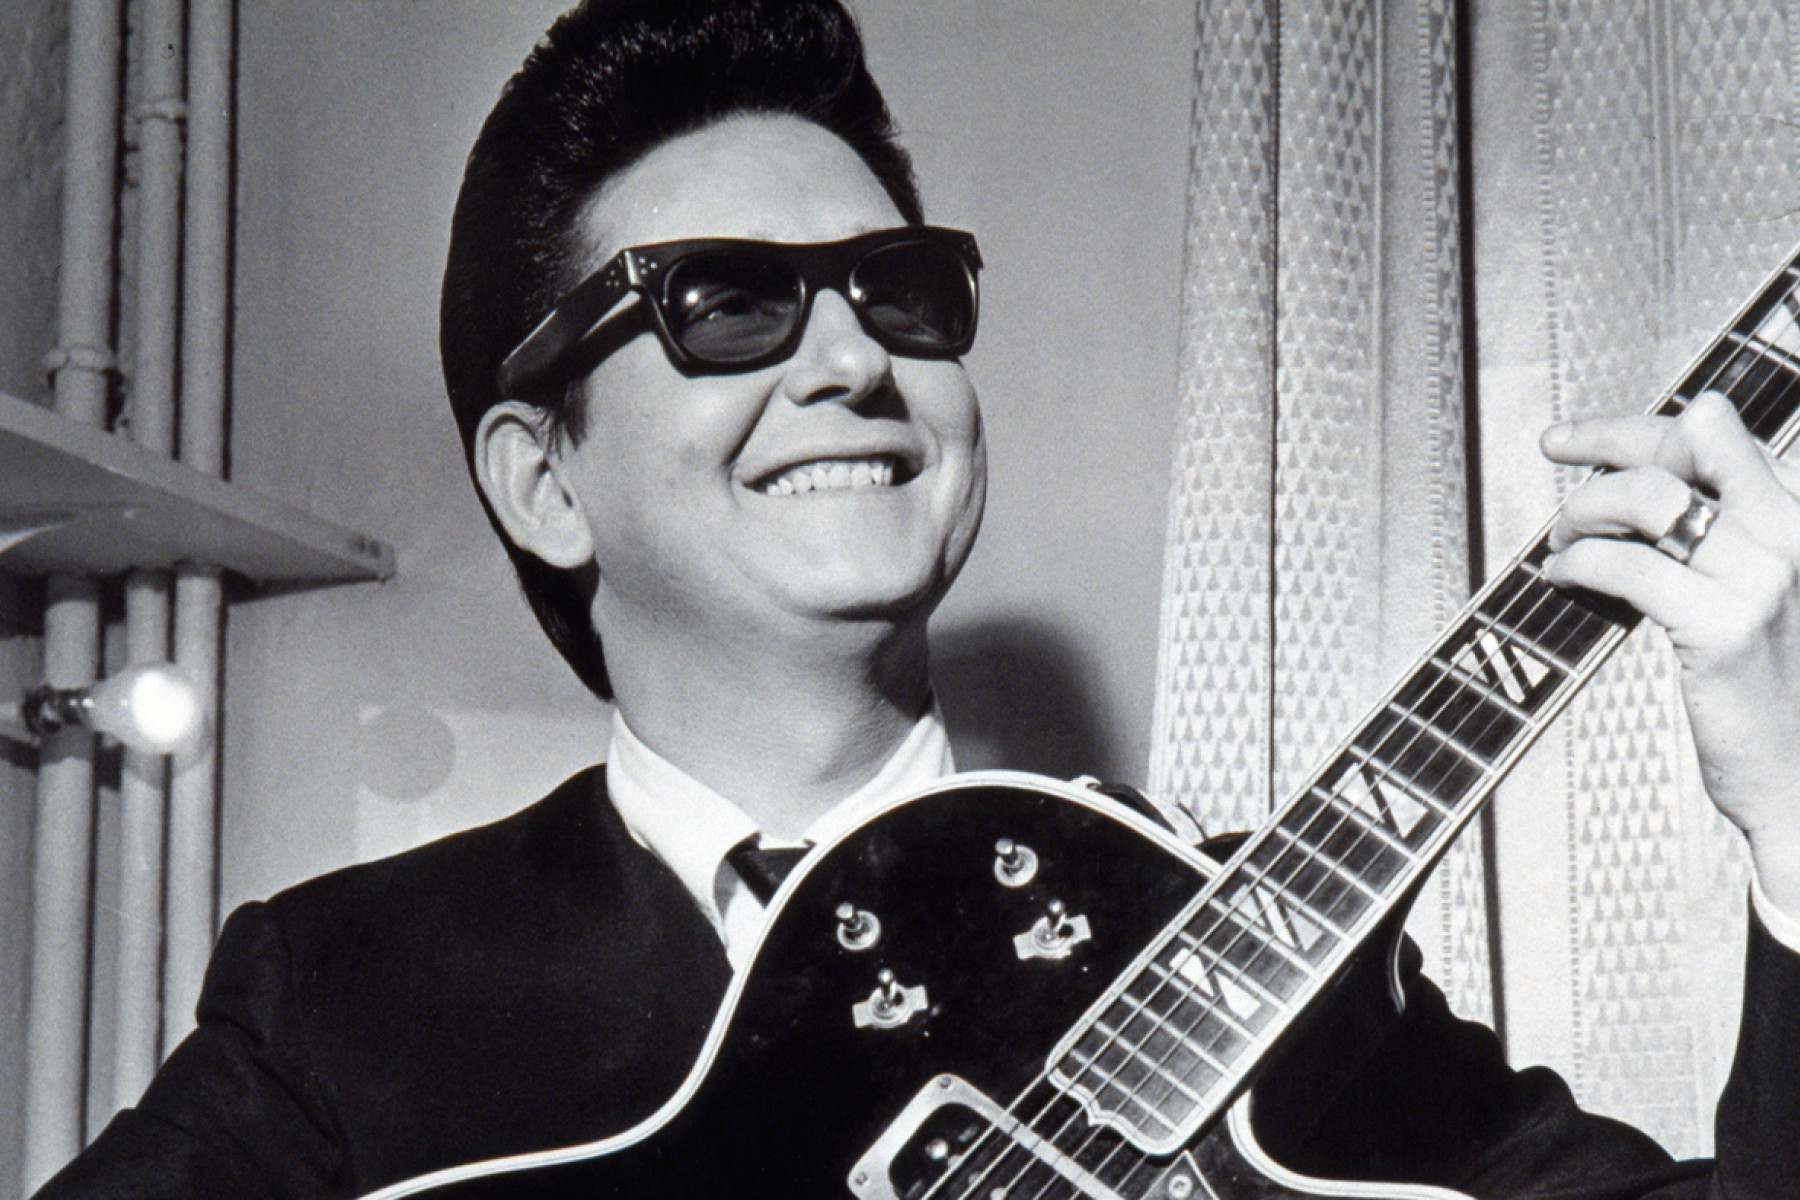 Happy birthday to The Caruso of Rock, Roy Orbison. Born this day in 1936 in Vernon, TX.  